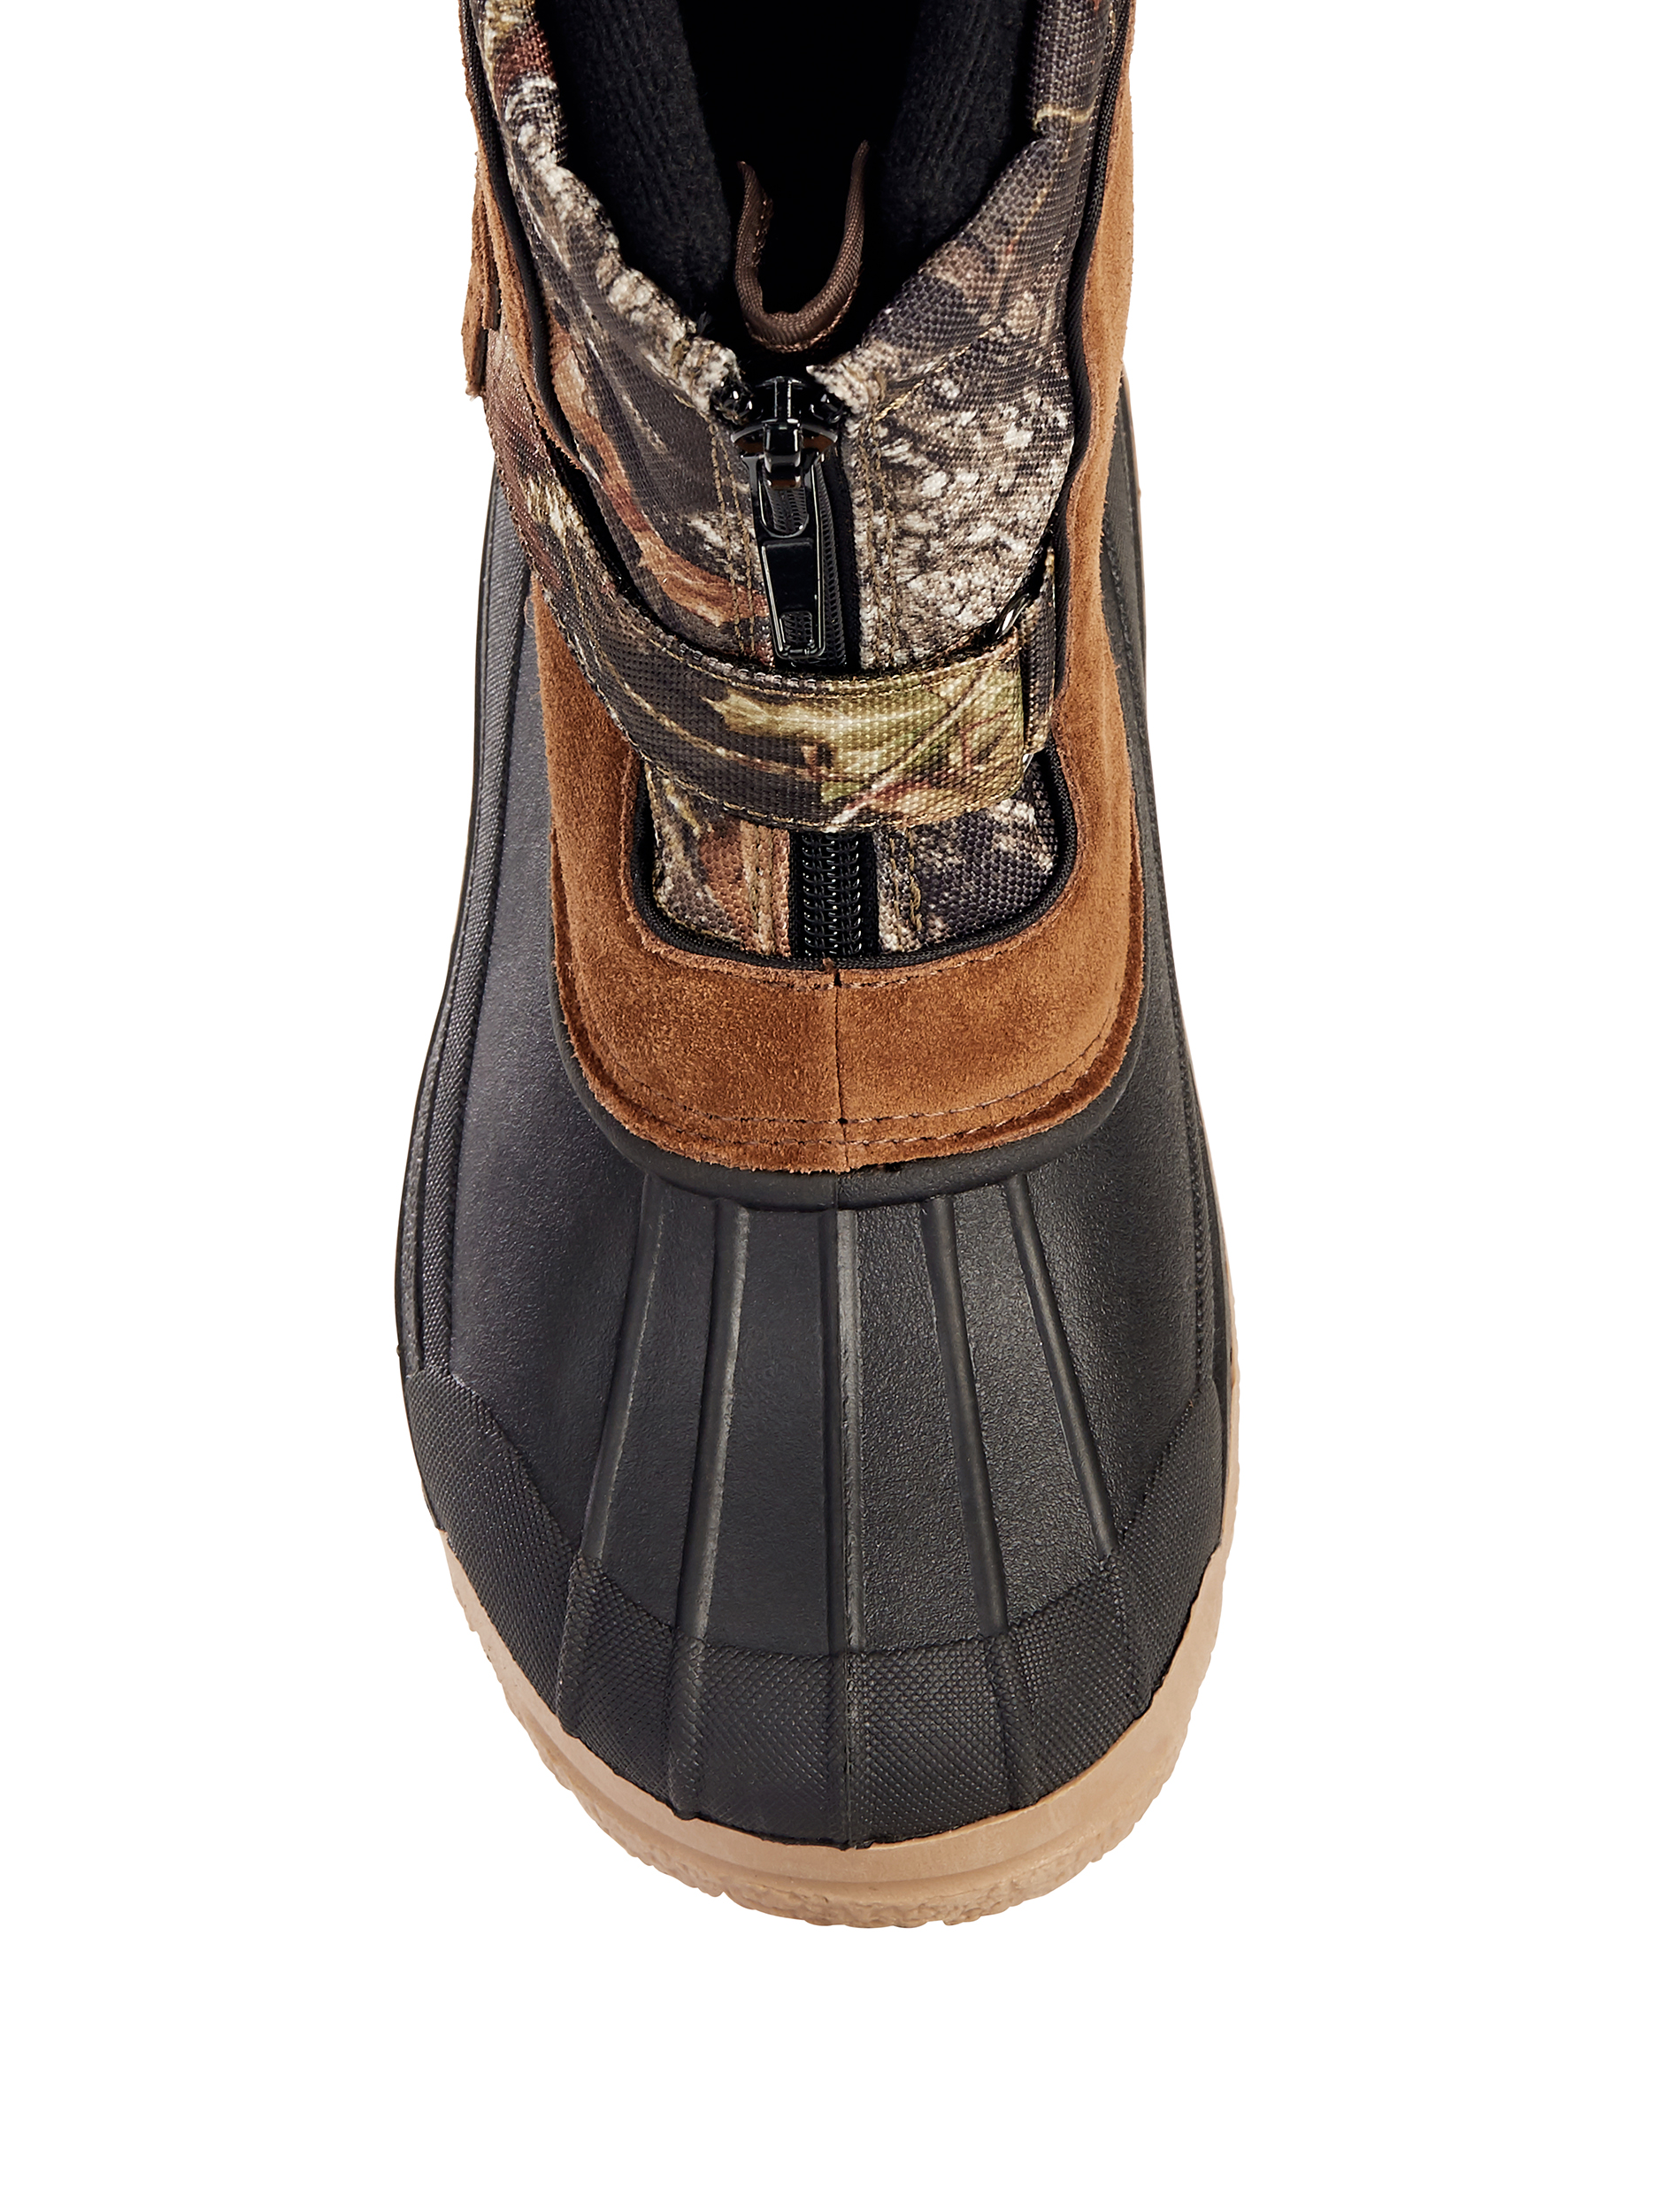 Ozark Trail Toddler Boys Temp Rated Camo Winter Boot - image 4 of 6